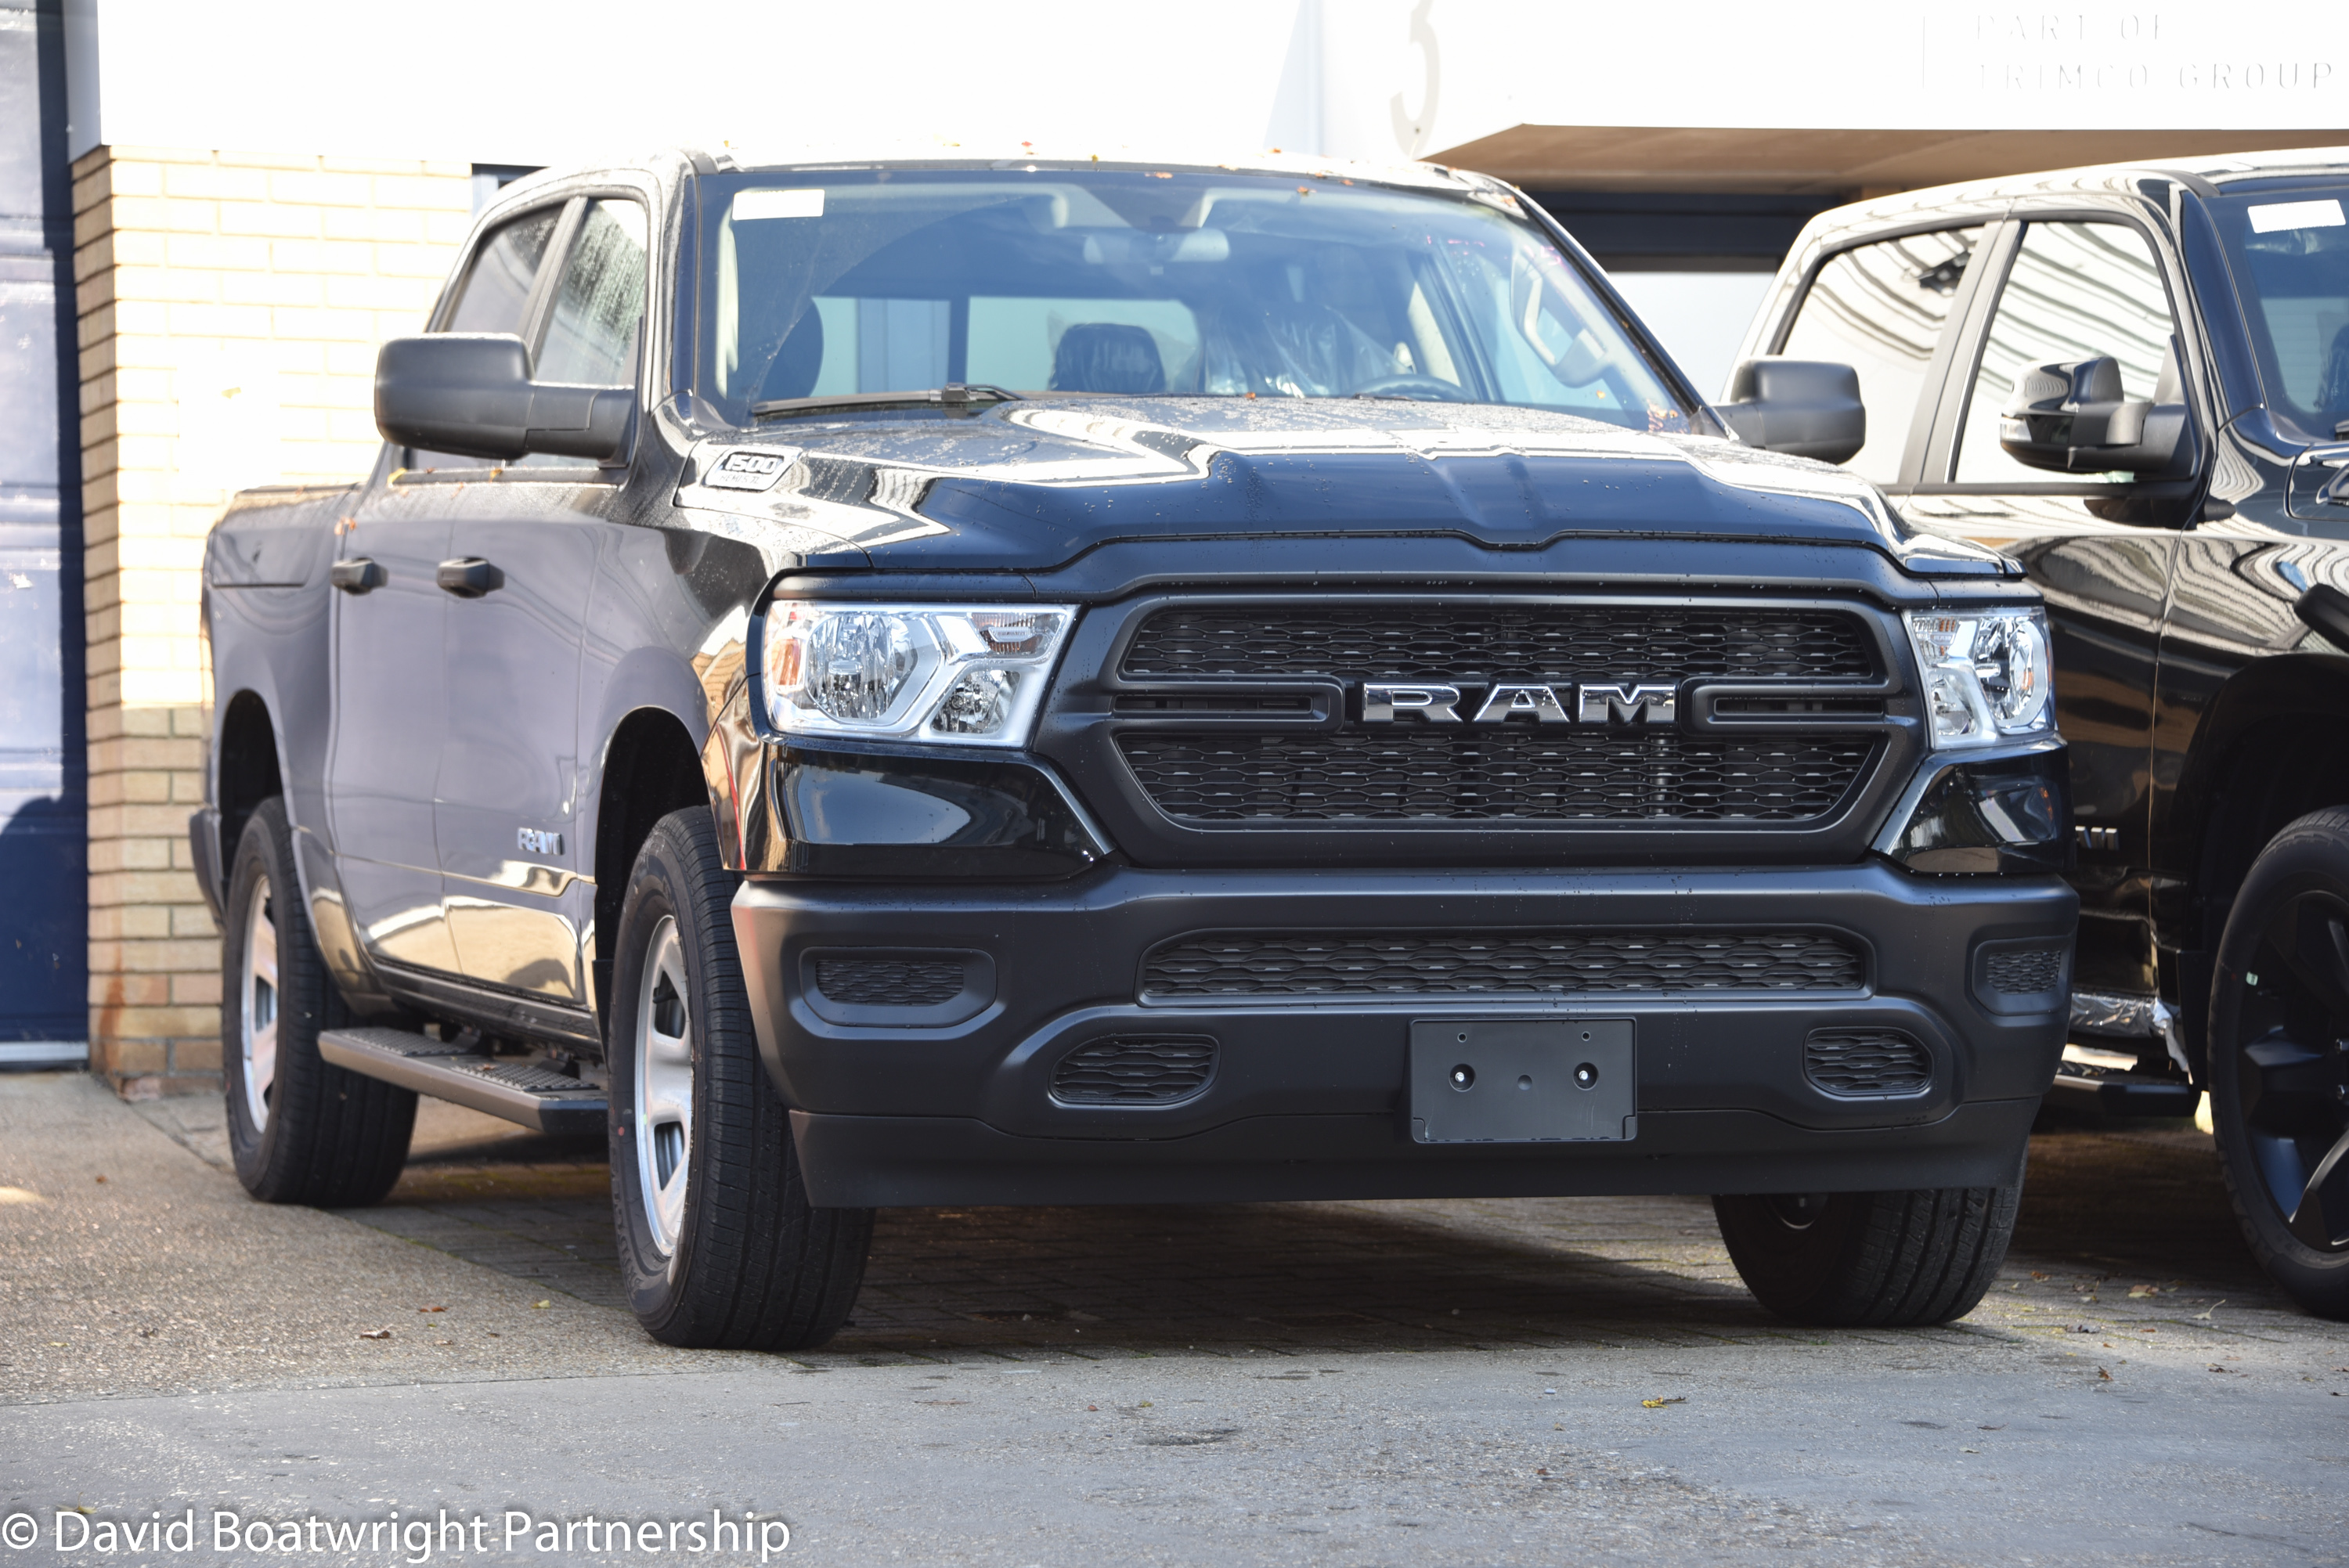 Dodge Ram Picture Gallery David Boatwright Partnership Official Dodge Ram Dealers